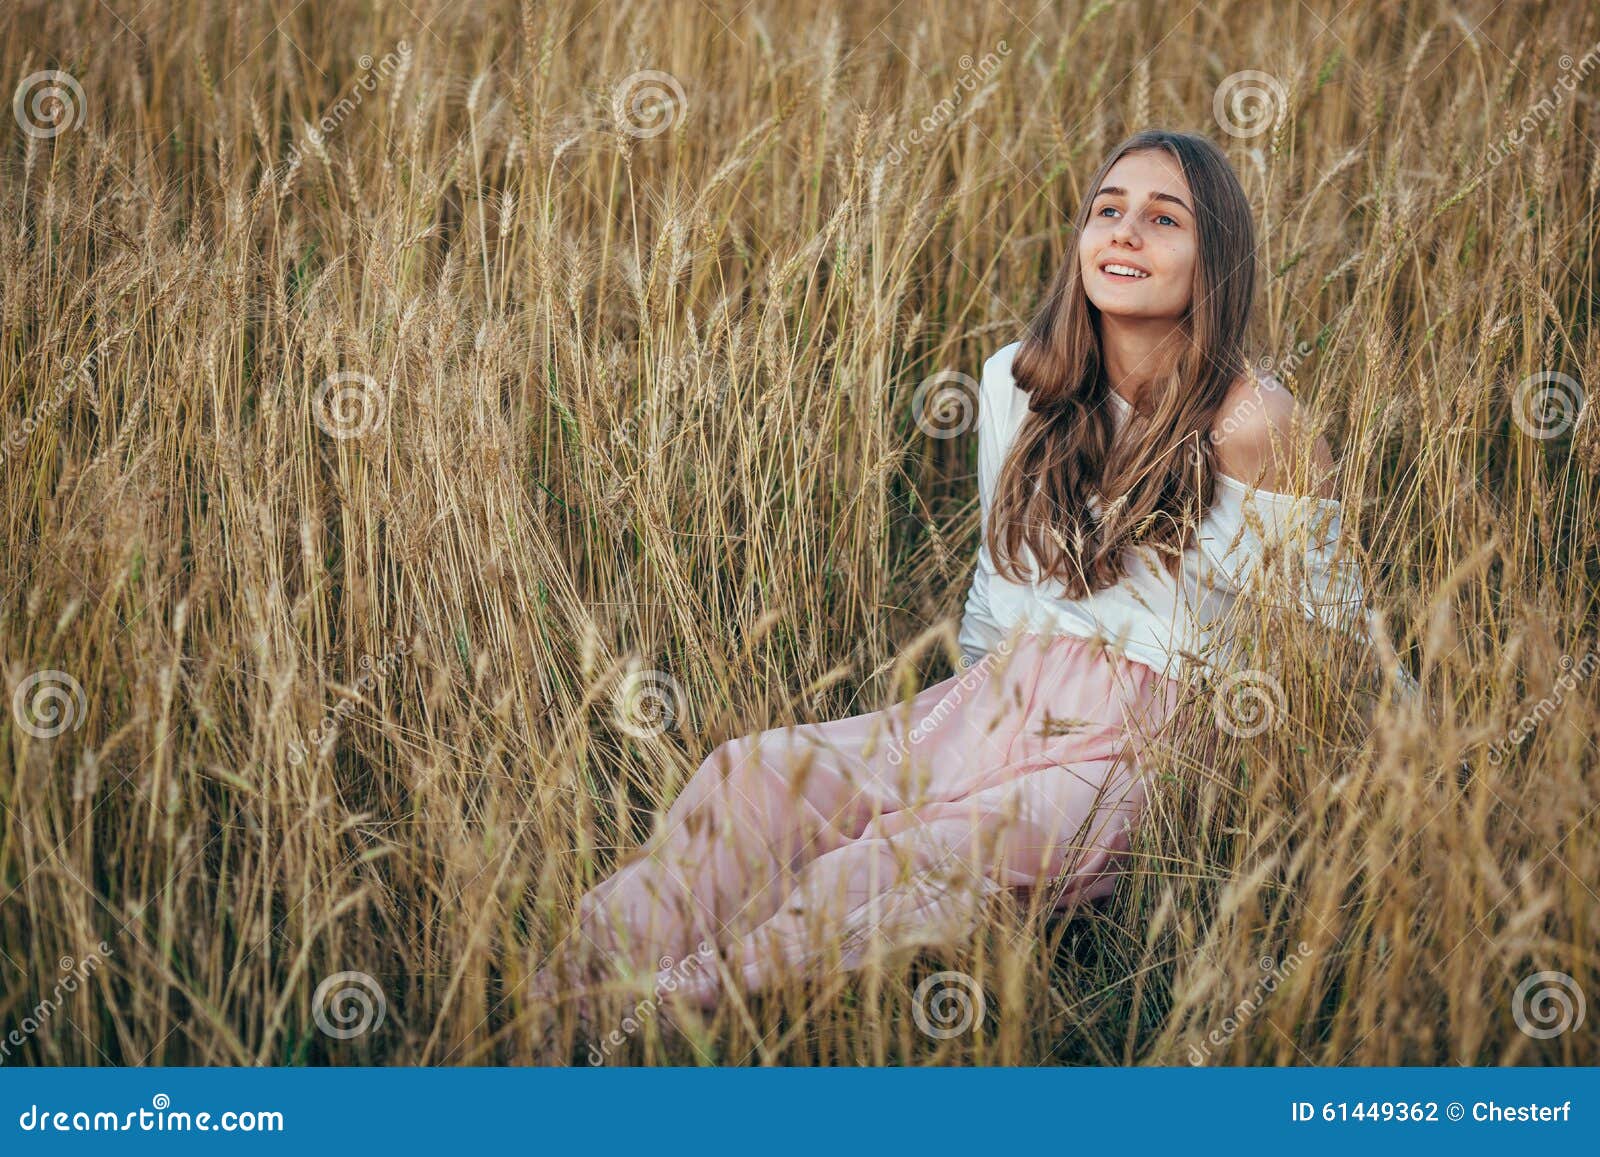 The Young Girl Posing Sitting In A Wheat Field, Hands 